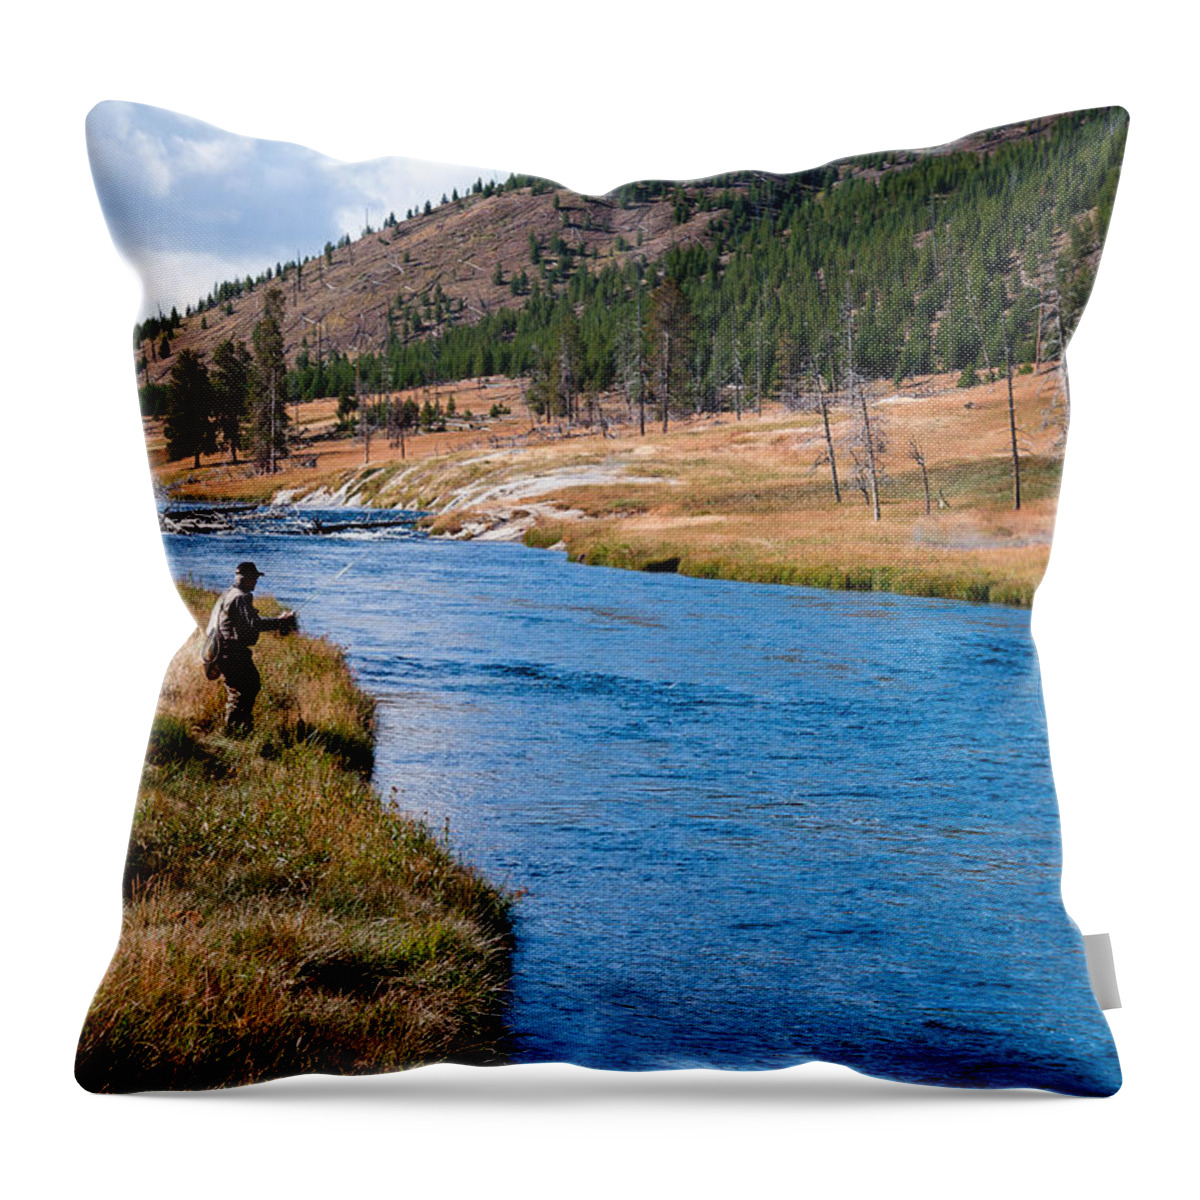 Wyoming Throw Pillow featuring the photograph Fly Fishing in Yellowstone by Lars Lentz